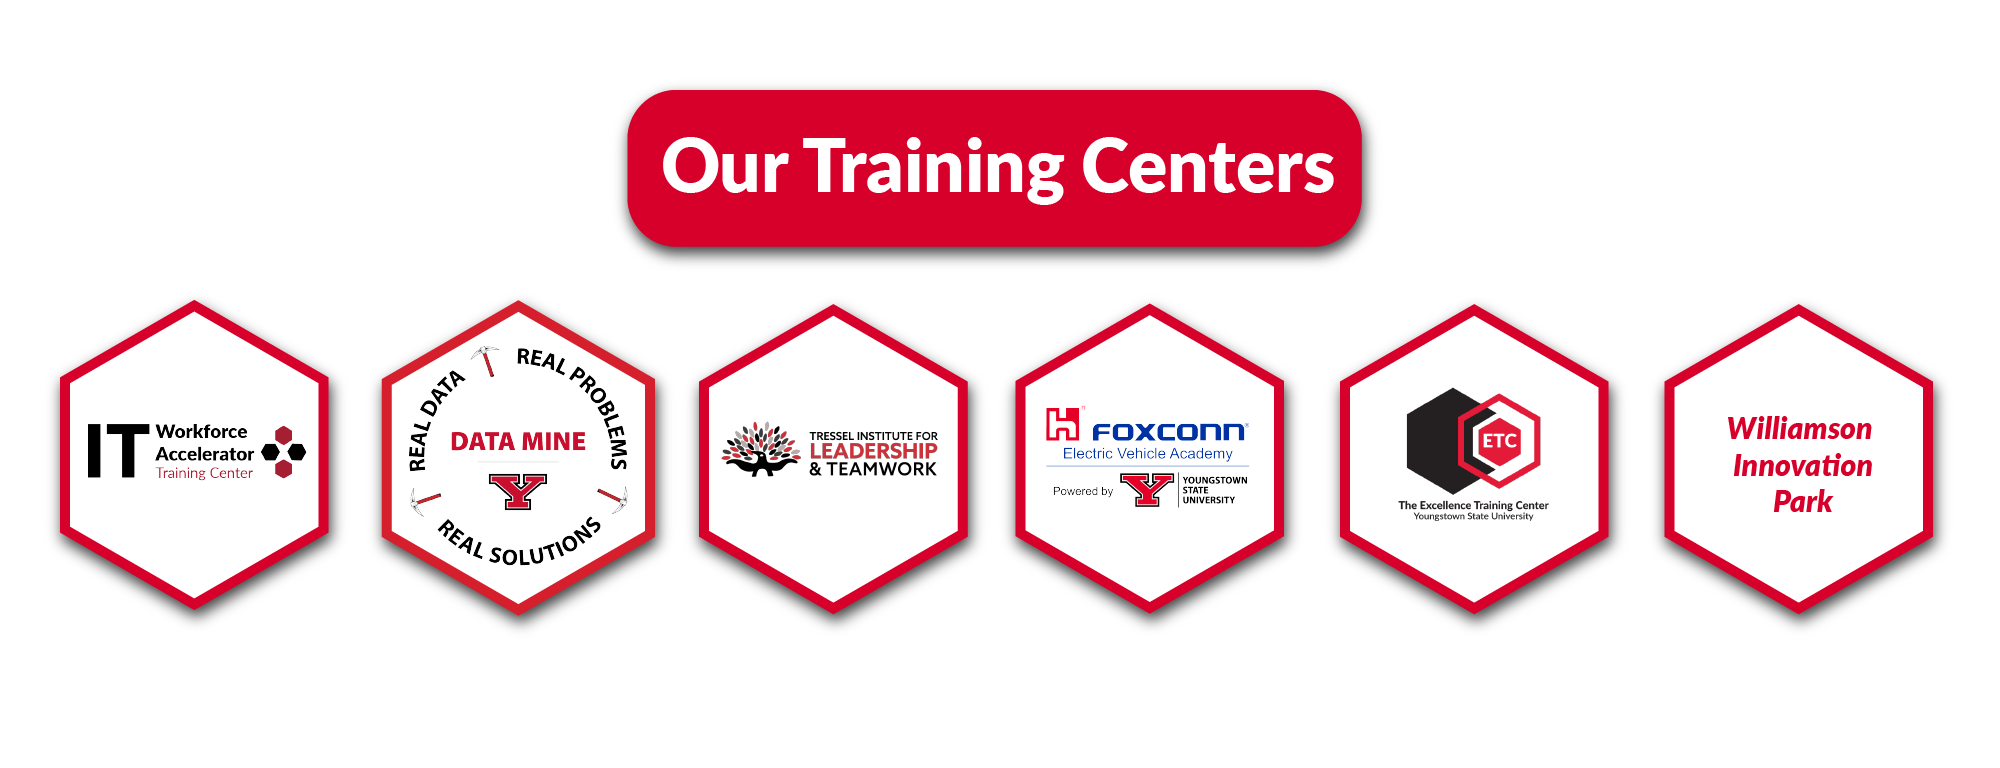 Our Training Centers